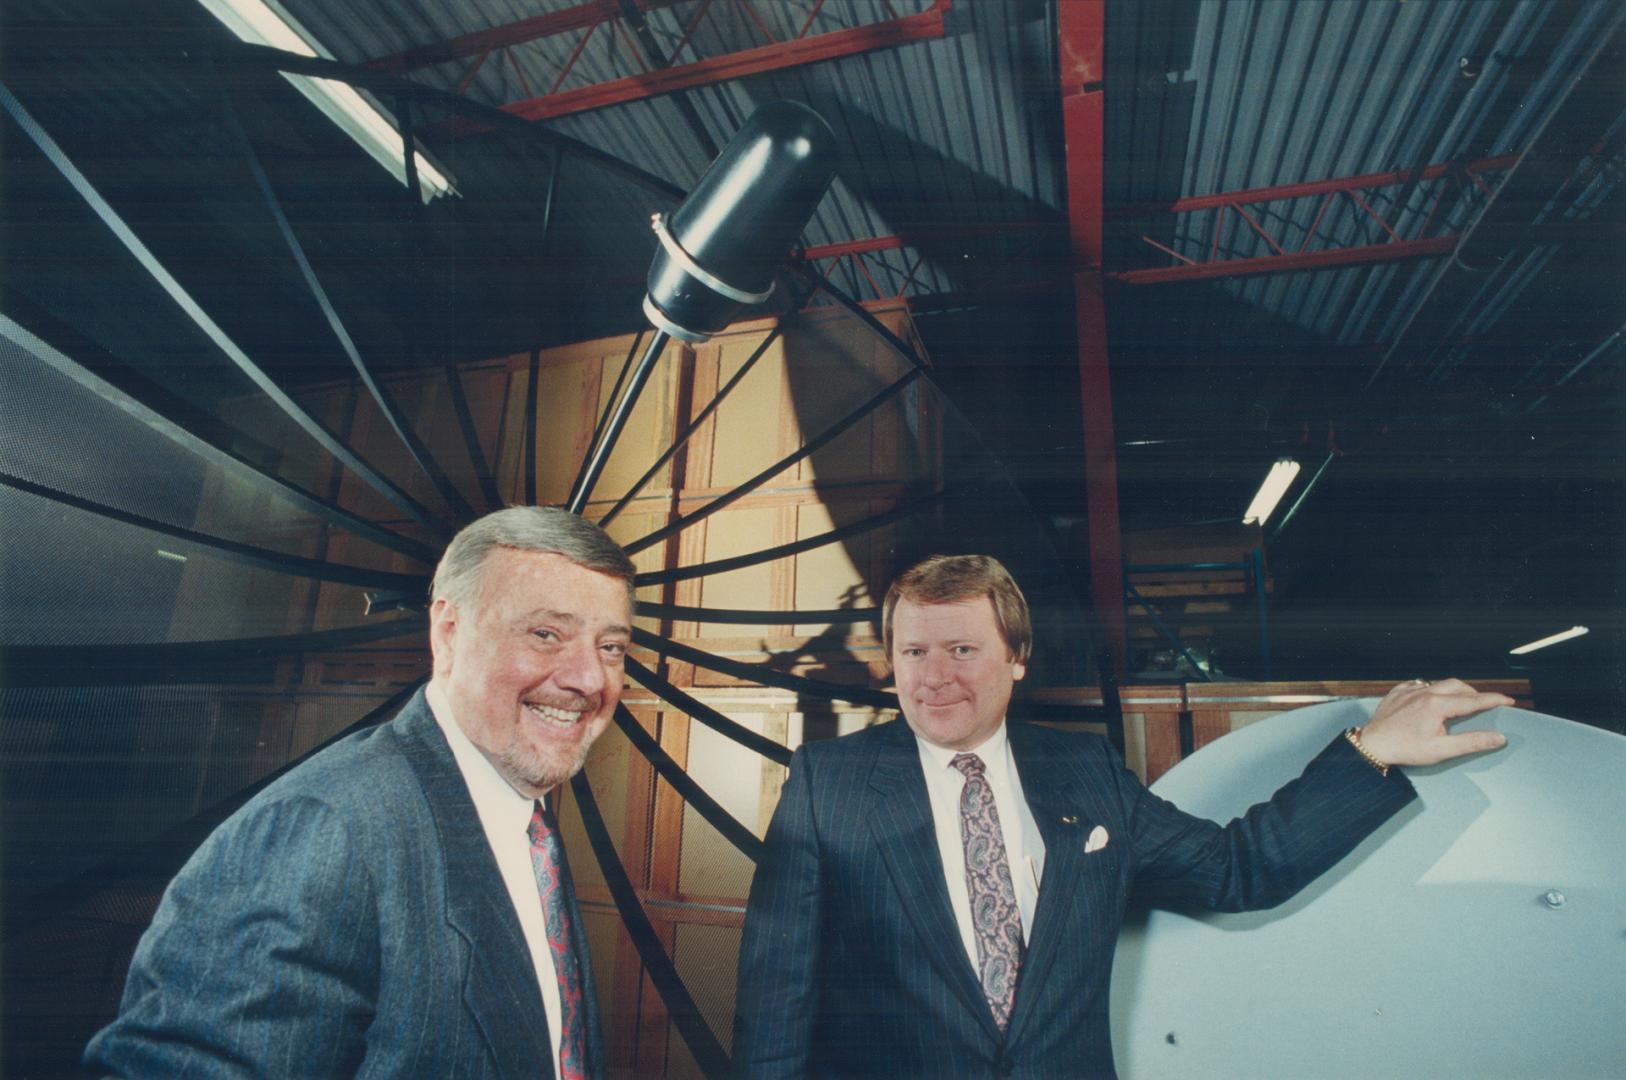 Satellite gazing: Oscar Steiner (left) founder of Tee-Comm Electronics, confers with Al Bahnman, president of the manufacturer of satellite TV dish receivers